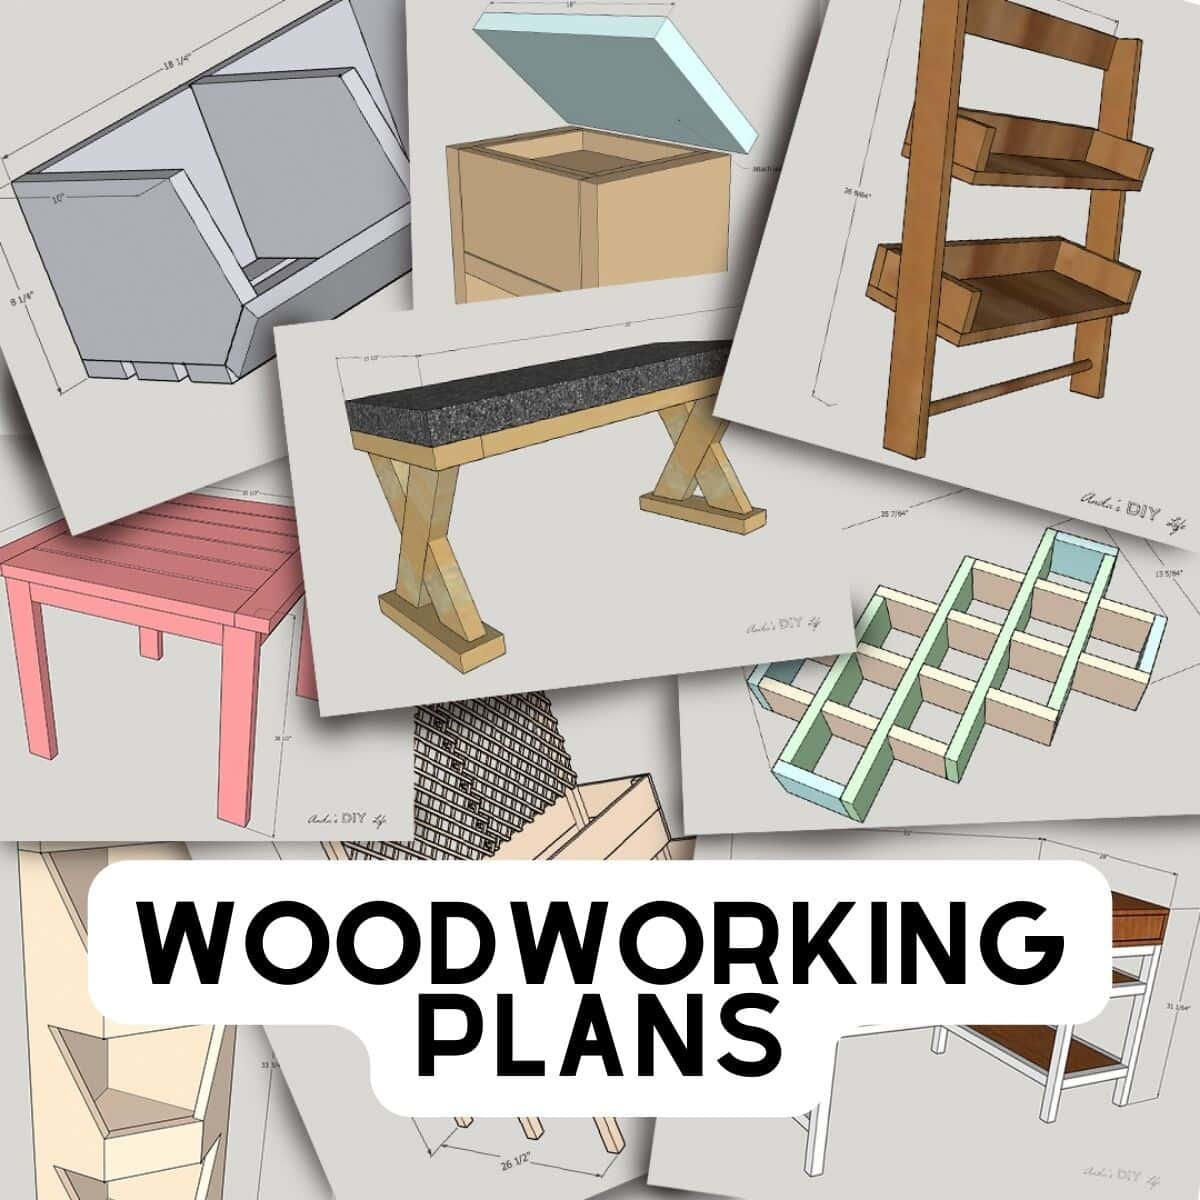 collage of woodworking plans schematics with text "woodworking plans"